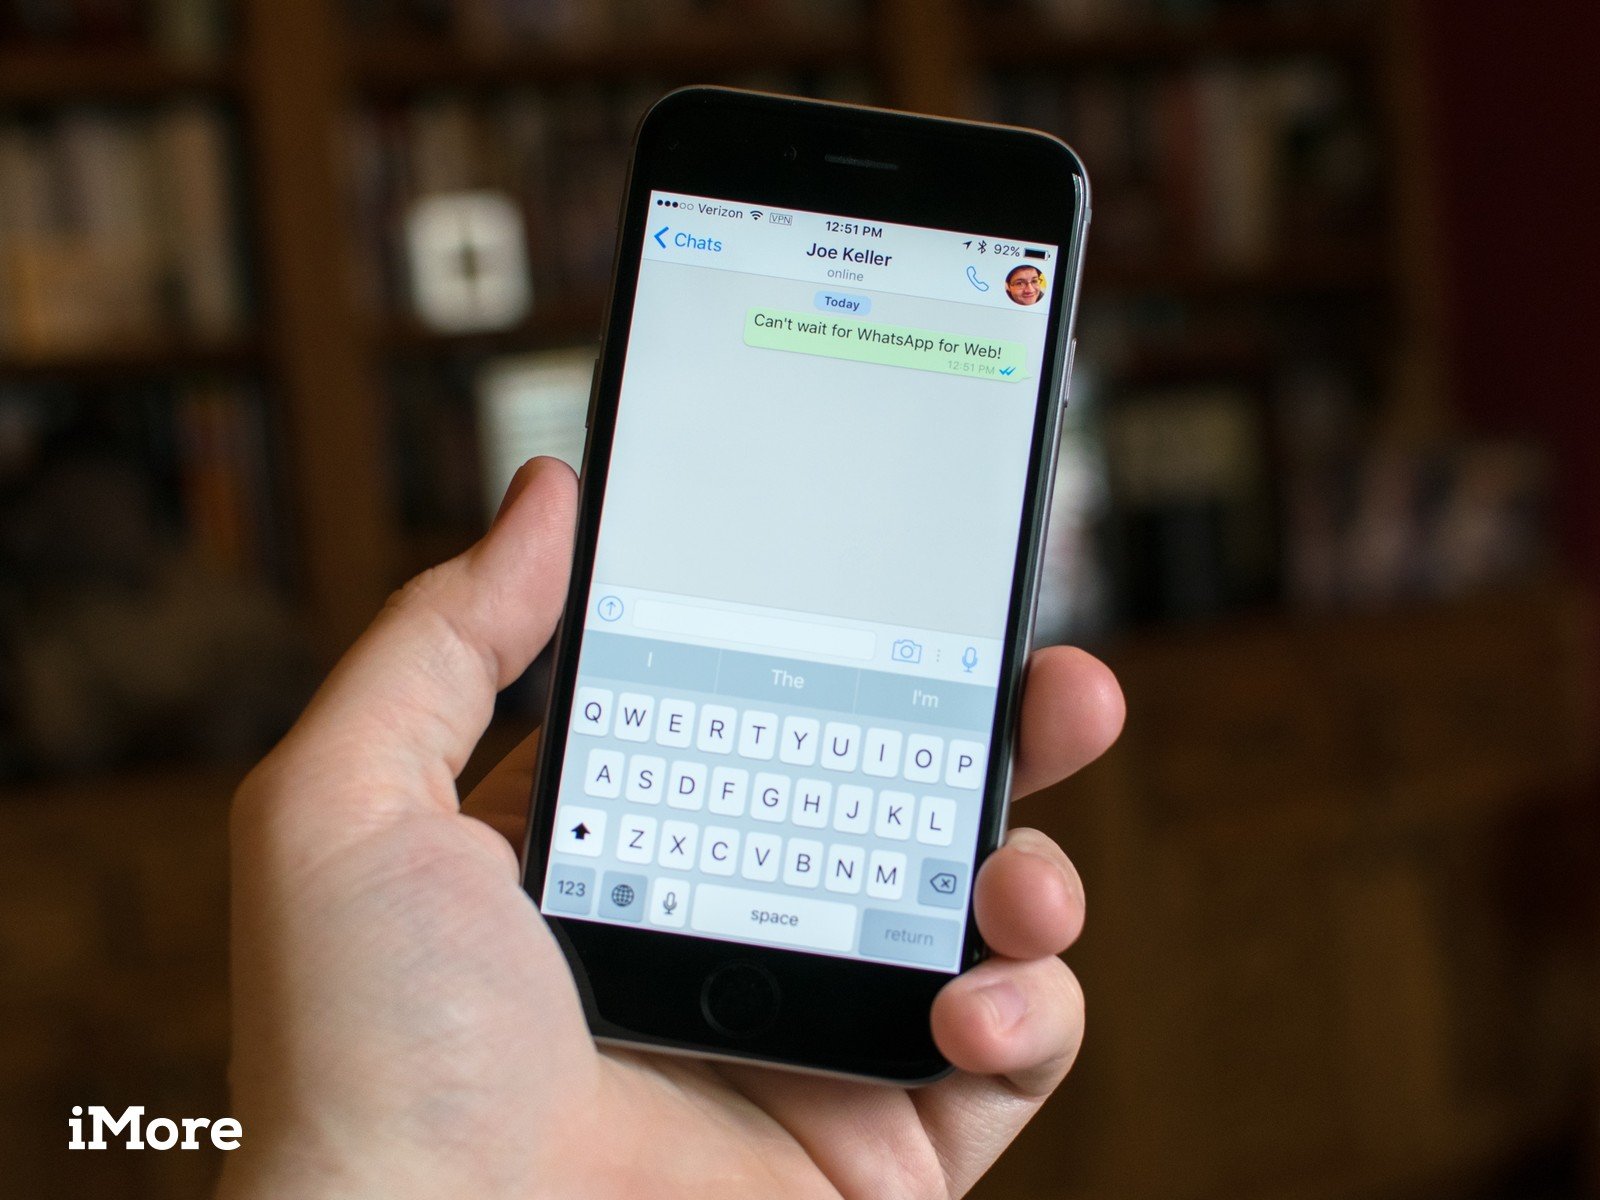 Download Iphone Messages To Mac